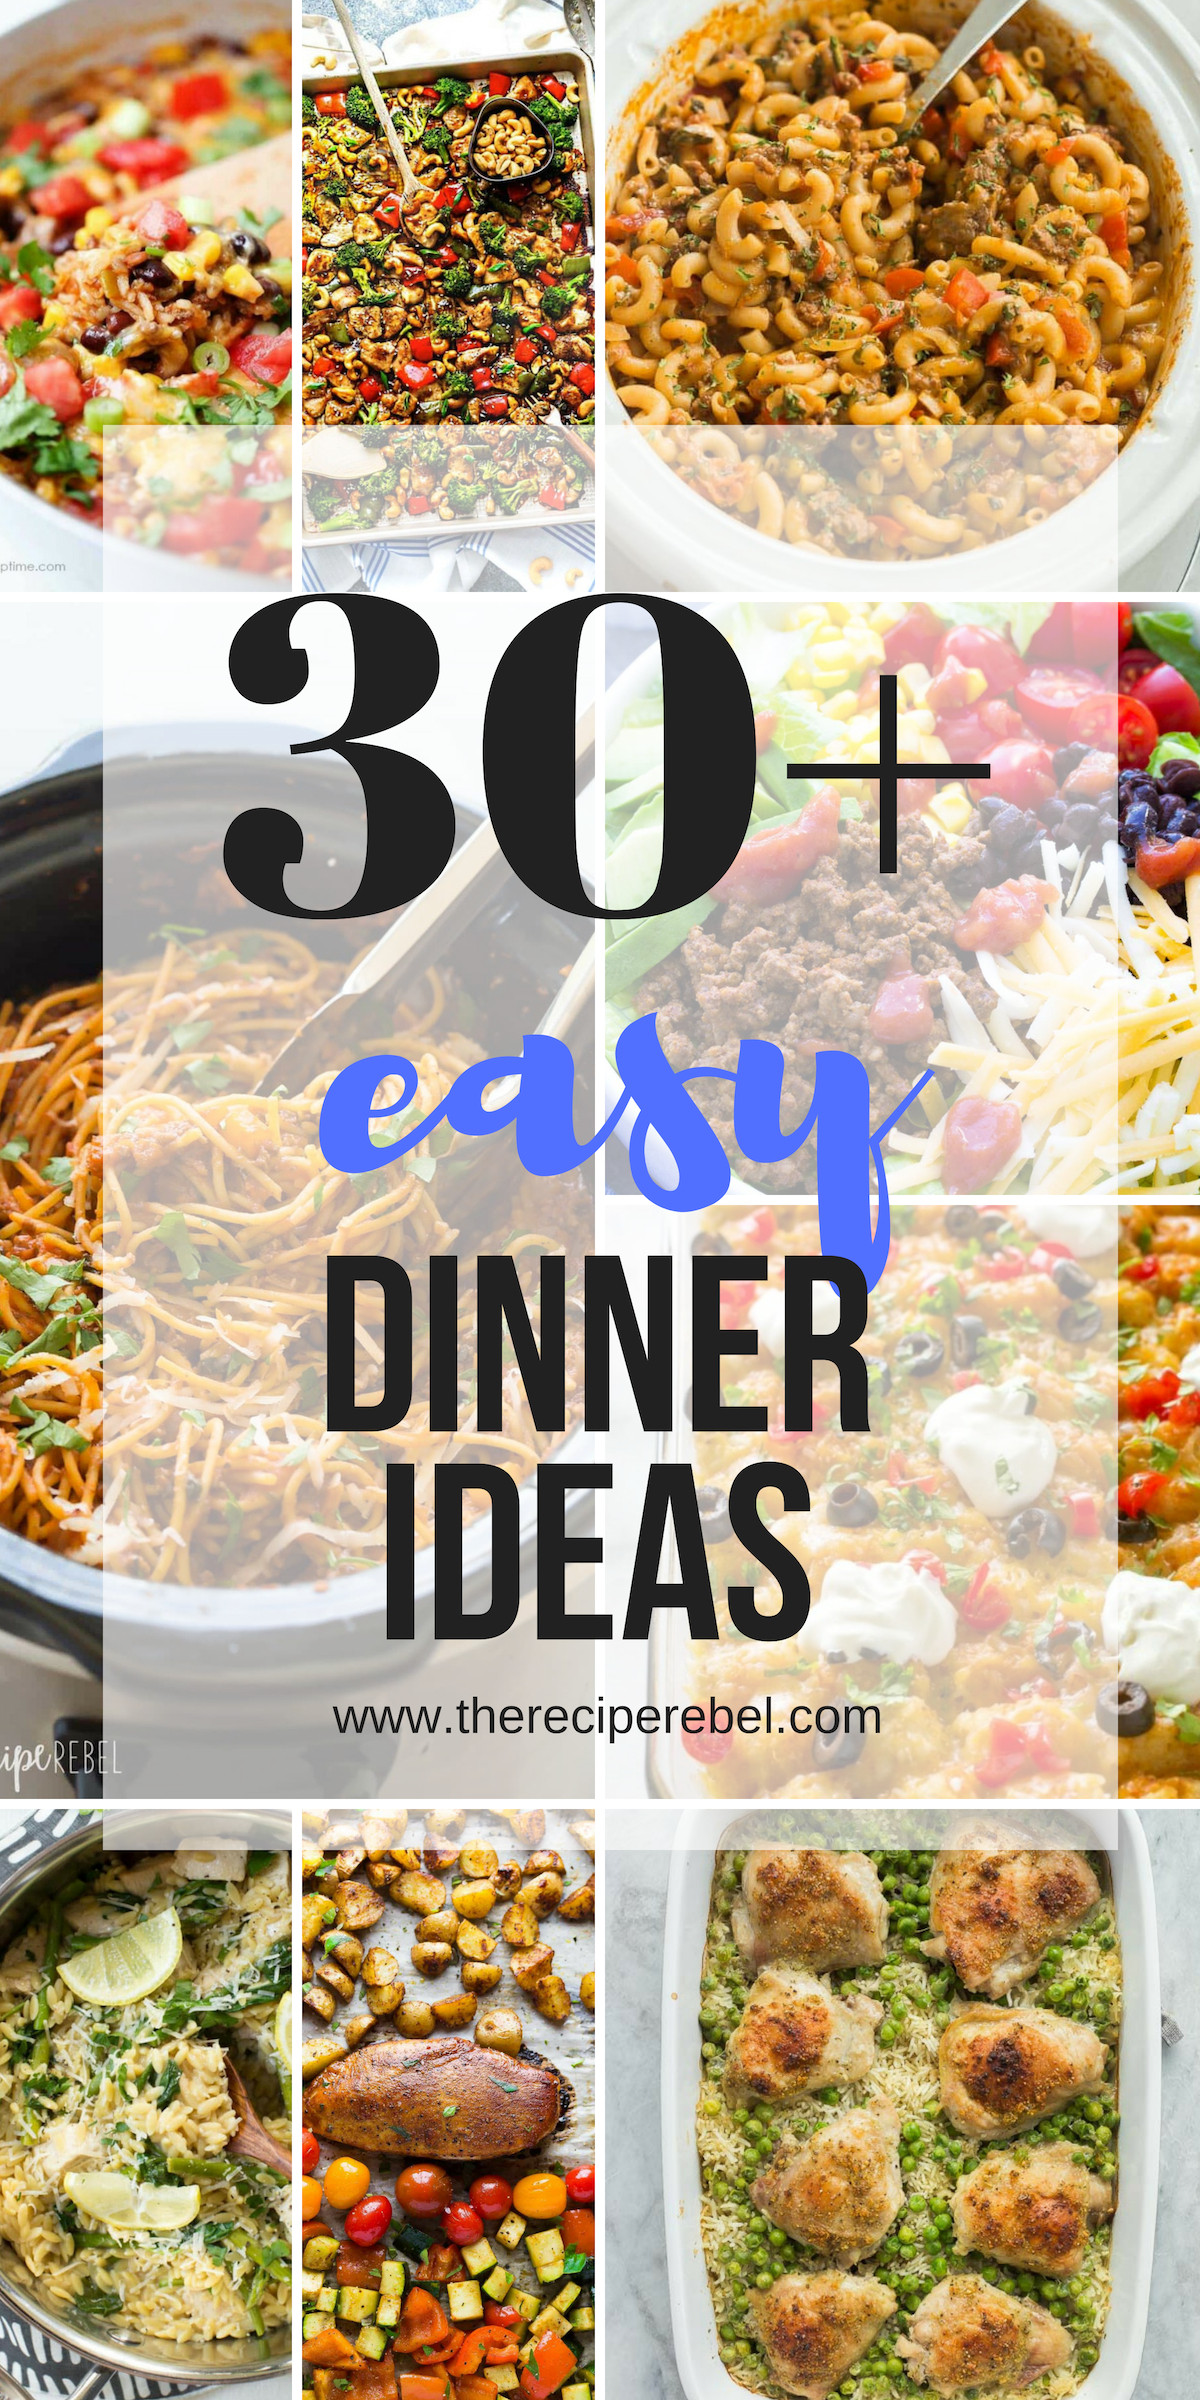 Valentine'S Dinner Ideas For Family
 30 Quick and Easy Dinner Ideas family friendly The